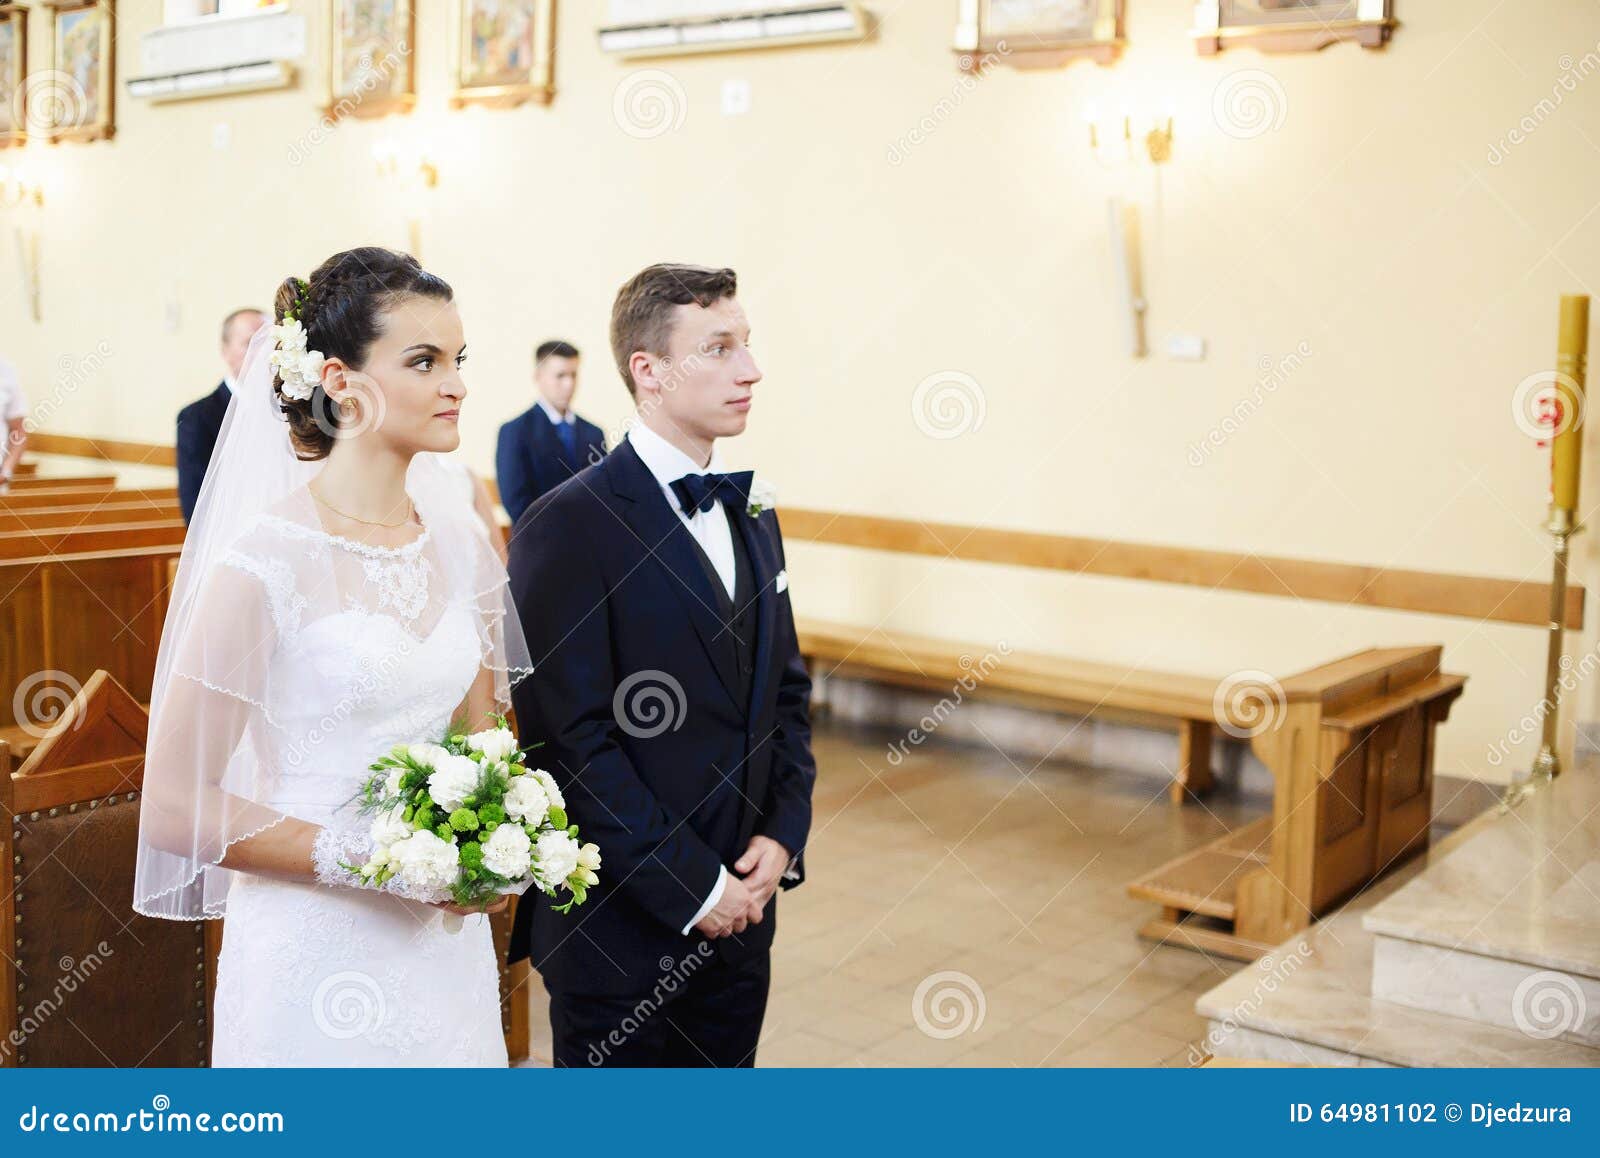 The Bride And Groom Standing At The Altar In The Church Stock